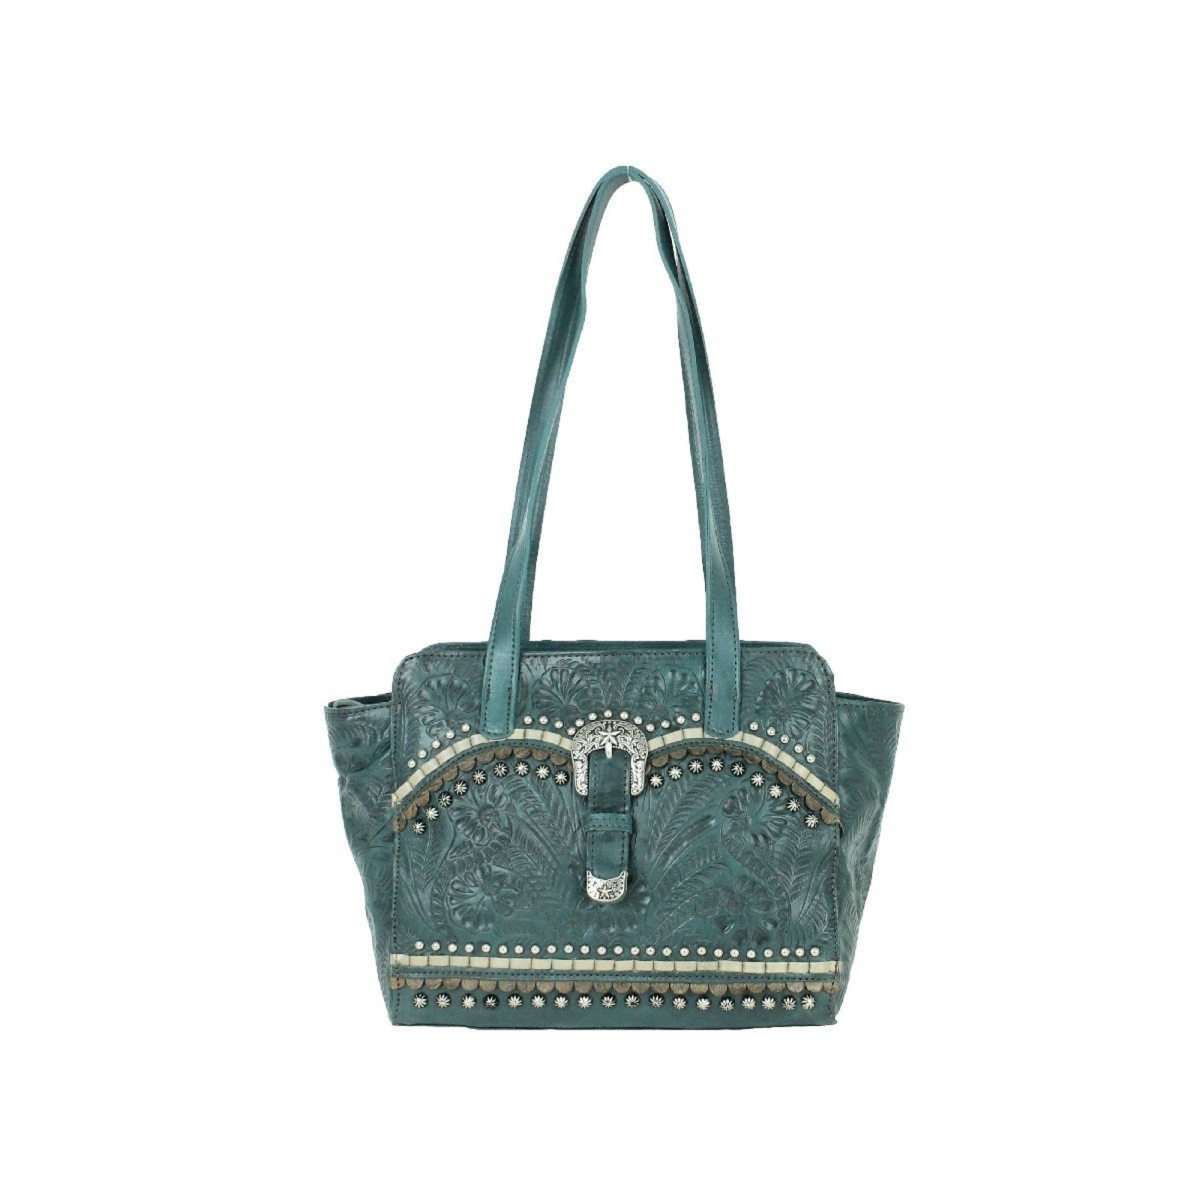 Picture of American West 2116564C Blue Ridge Zip Top Tote Bag with Secret Compartment, Dark Turquoise